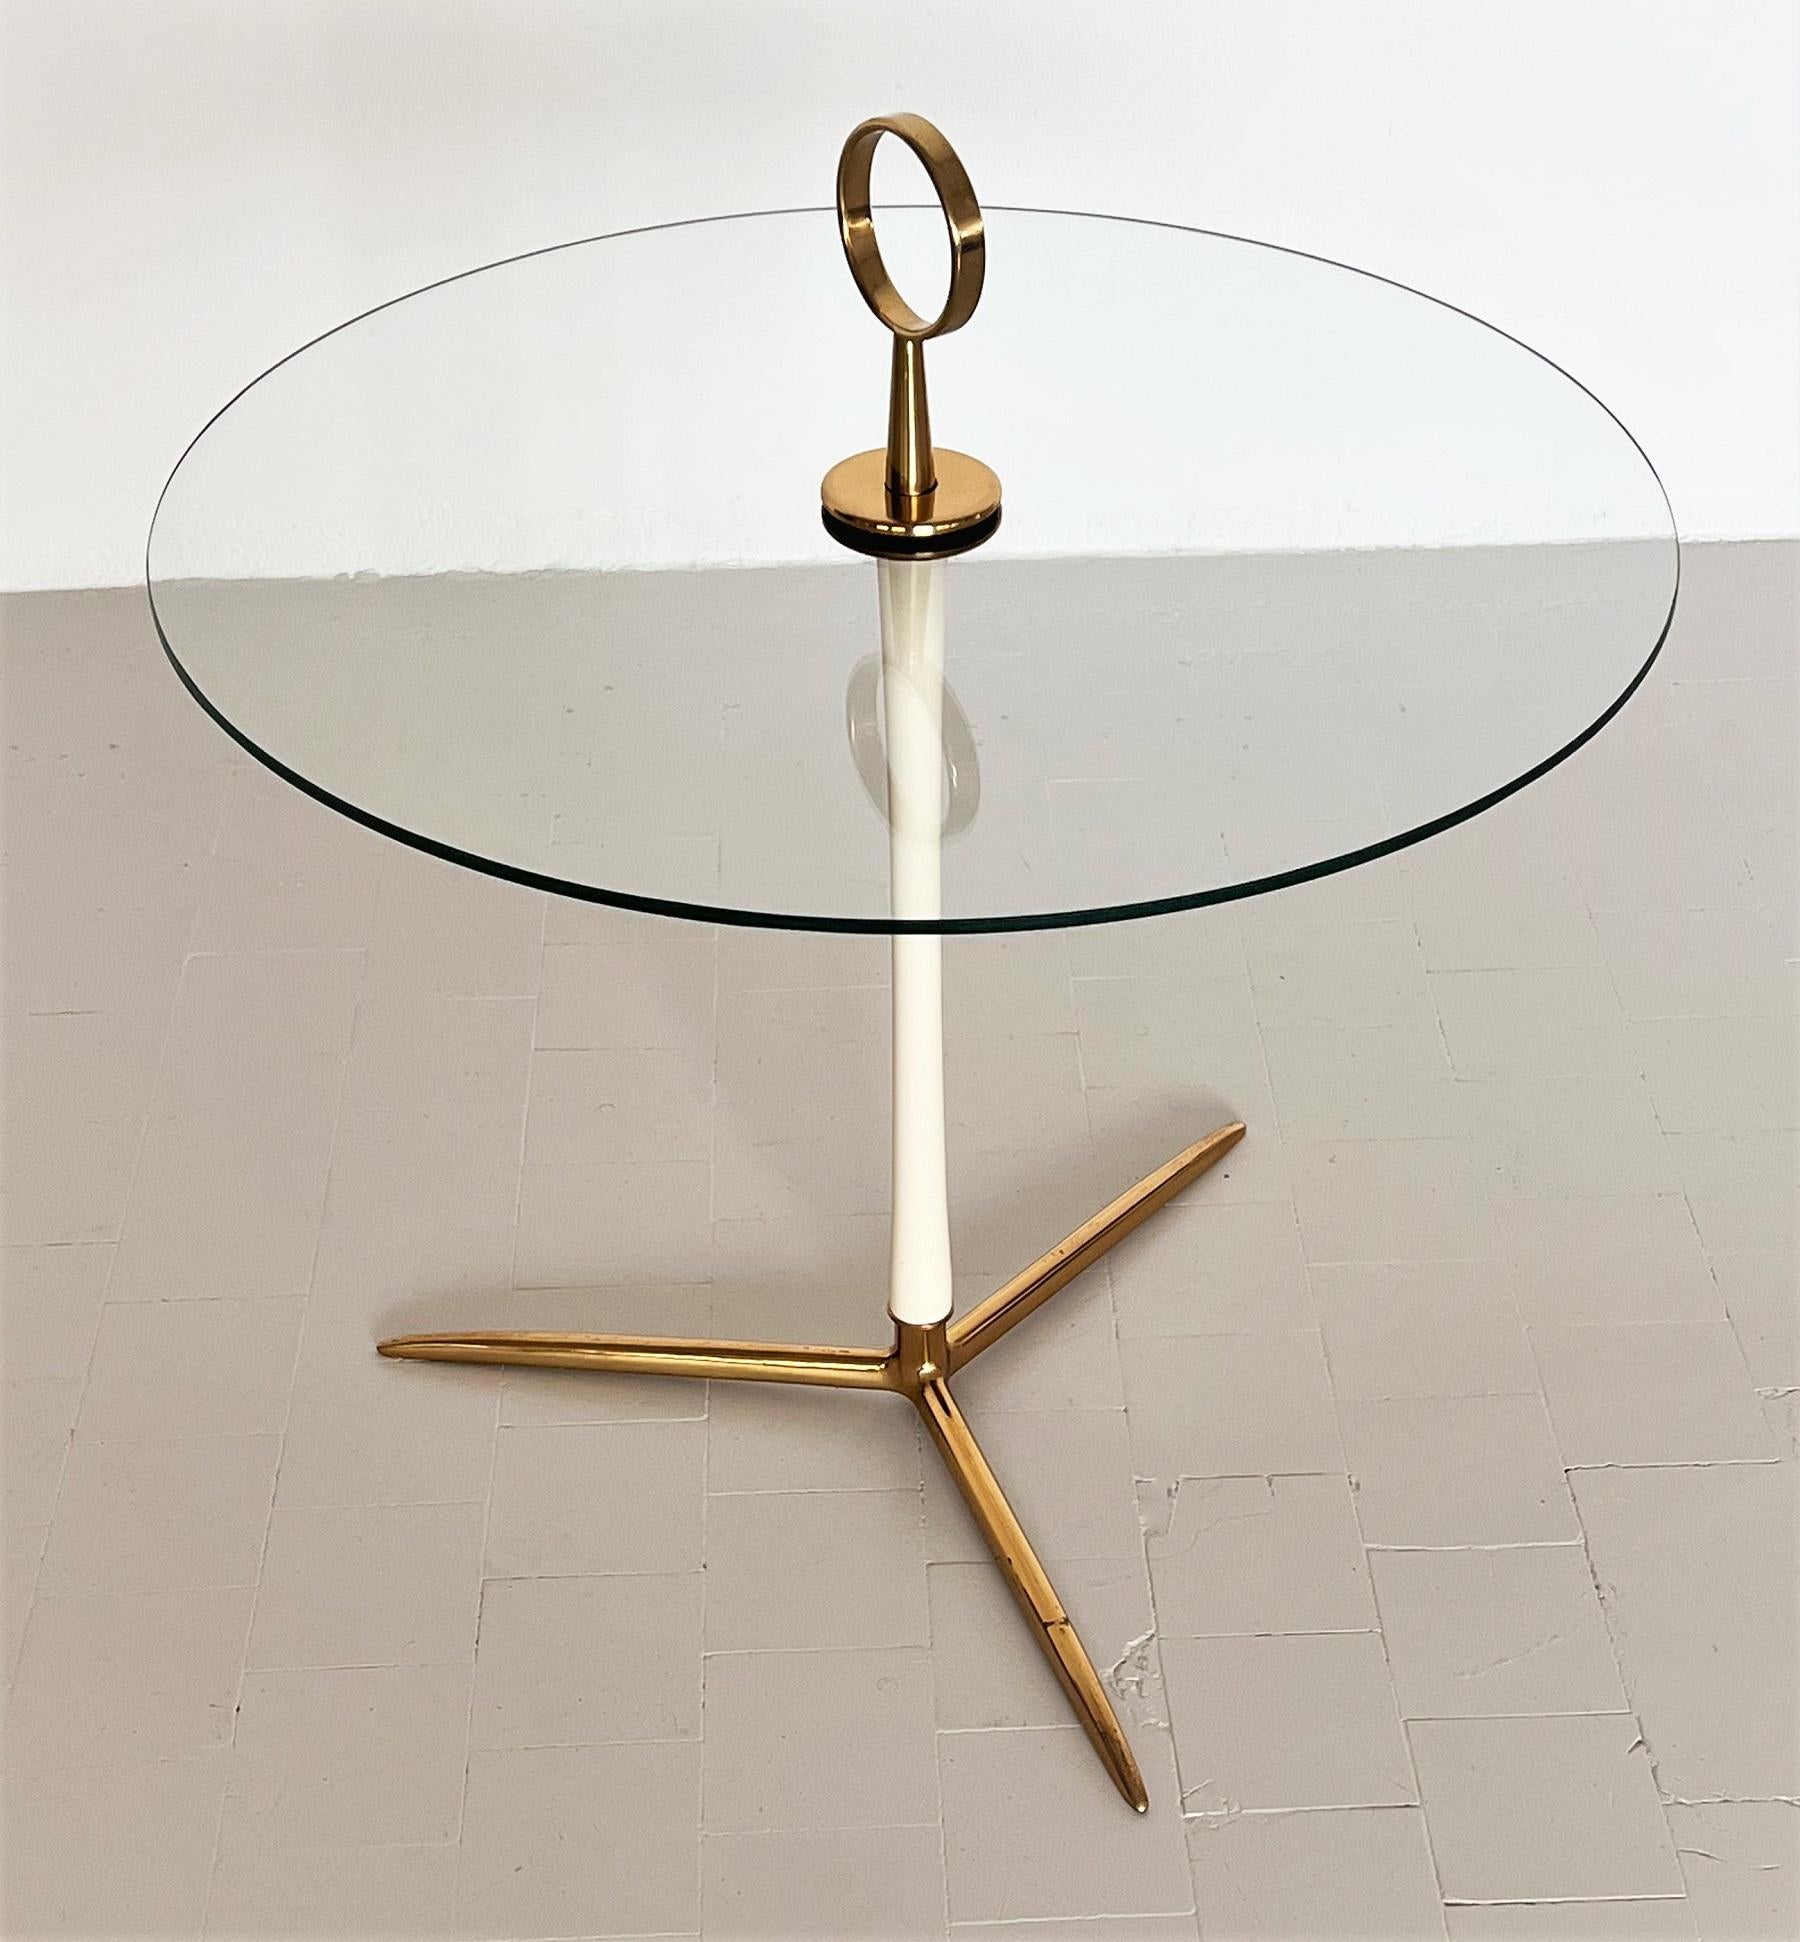 Late 20th Century German Midcentury Side Table in Brass and Glass by Vereinigte Werkstätten, 1970s For Sale